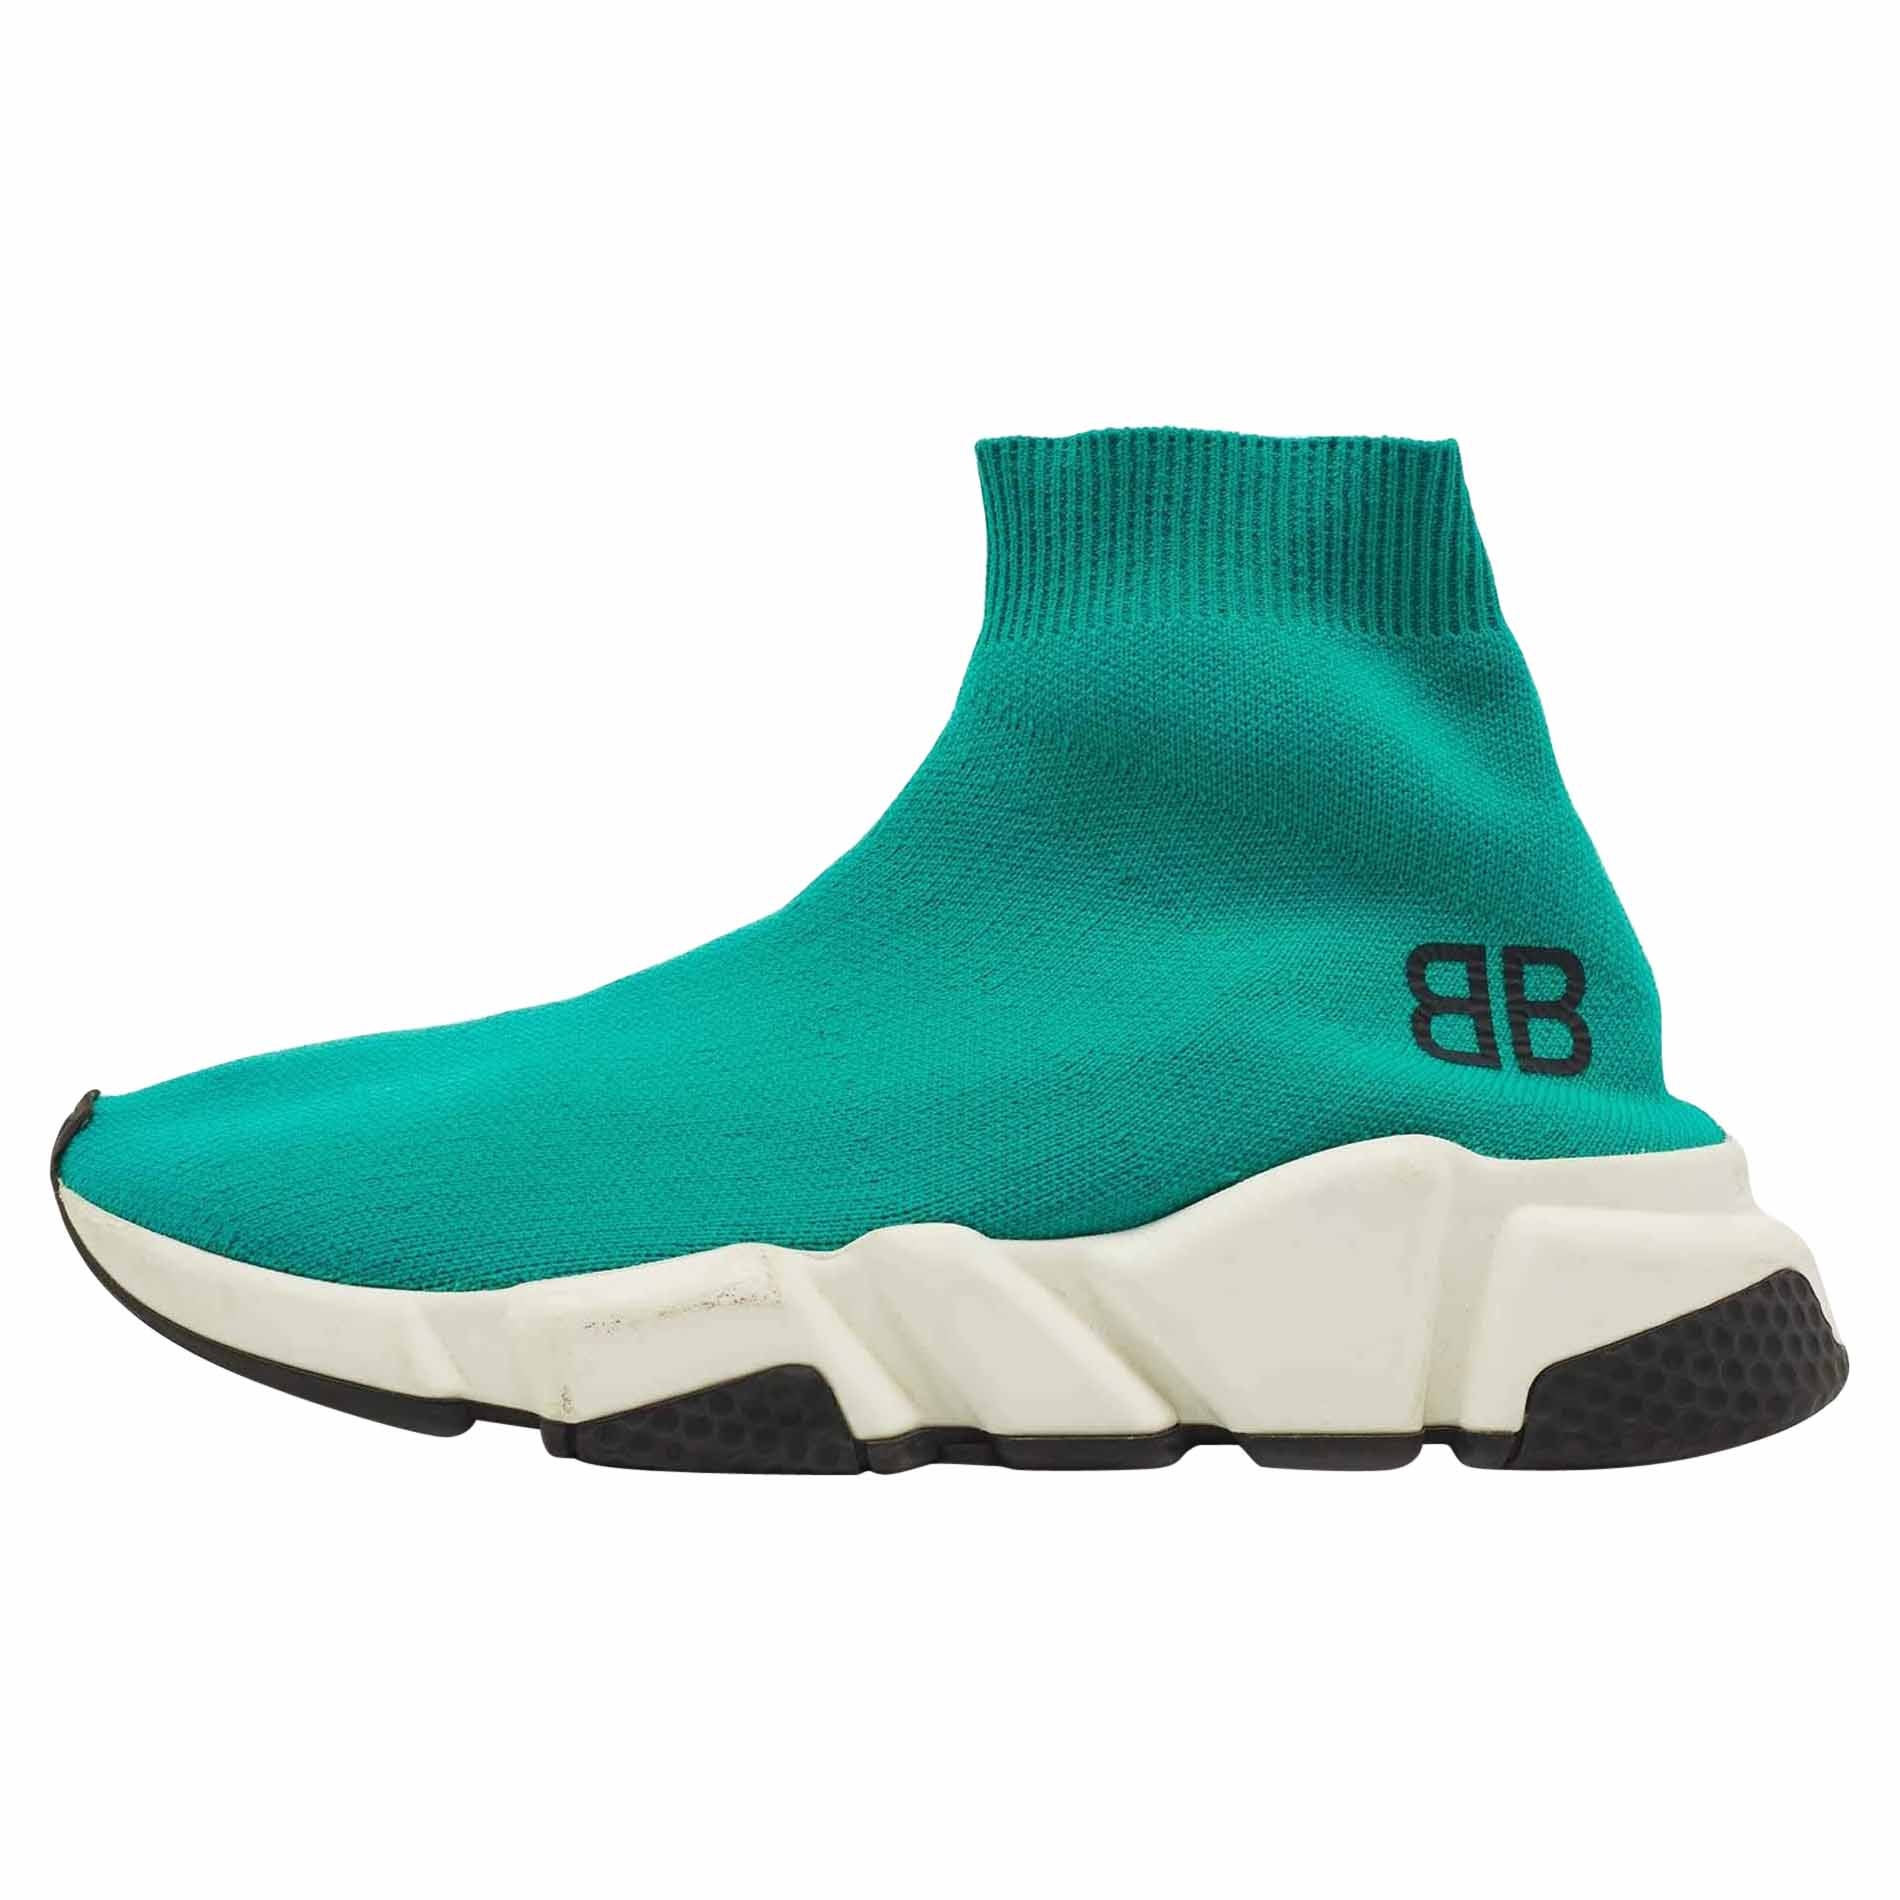 Balenciaga Turquoise Knit Fabric Speed Trainer Sneakers Size 35 For Sale